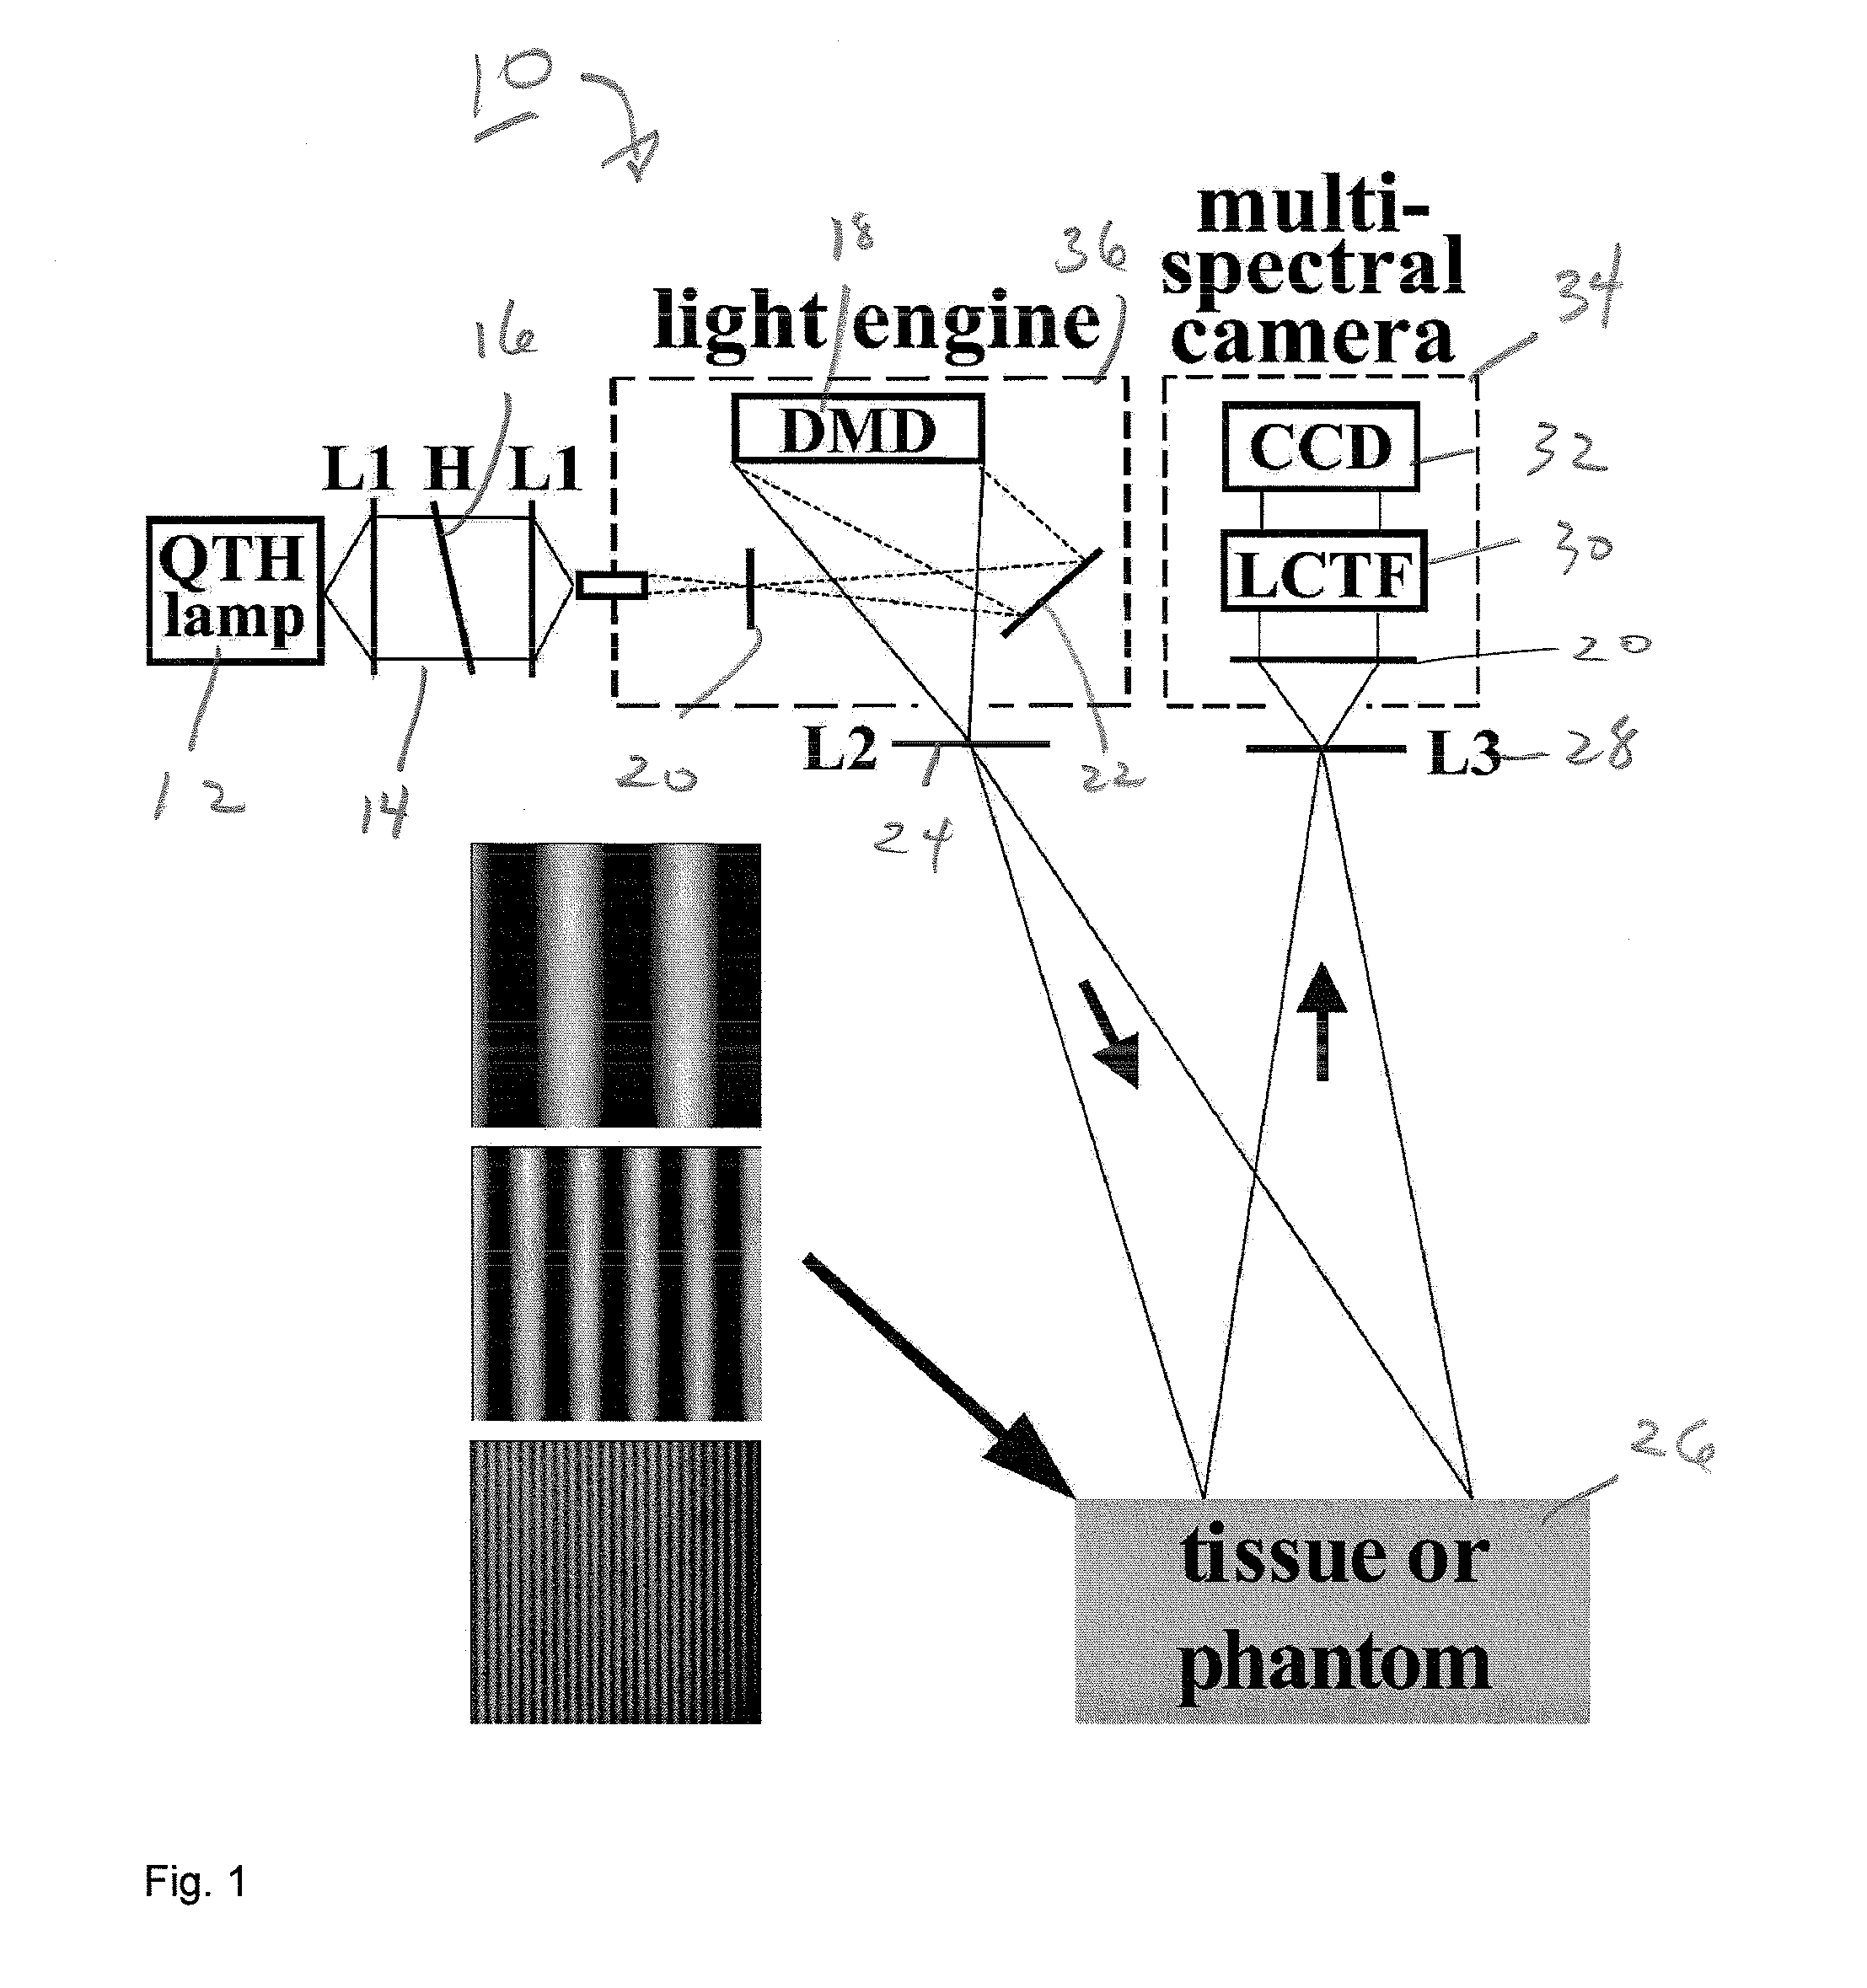 Method and apparatus for performing qualitative and quantitative analysis of produce (fruit, vegetables) using spatially structured illumination